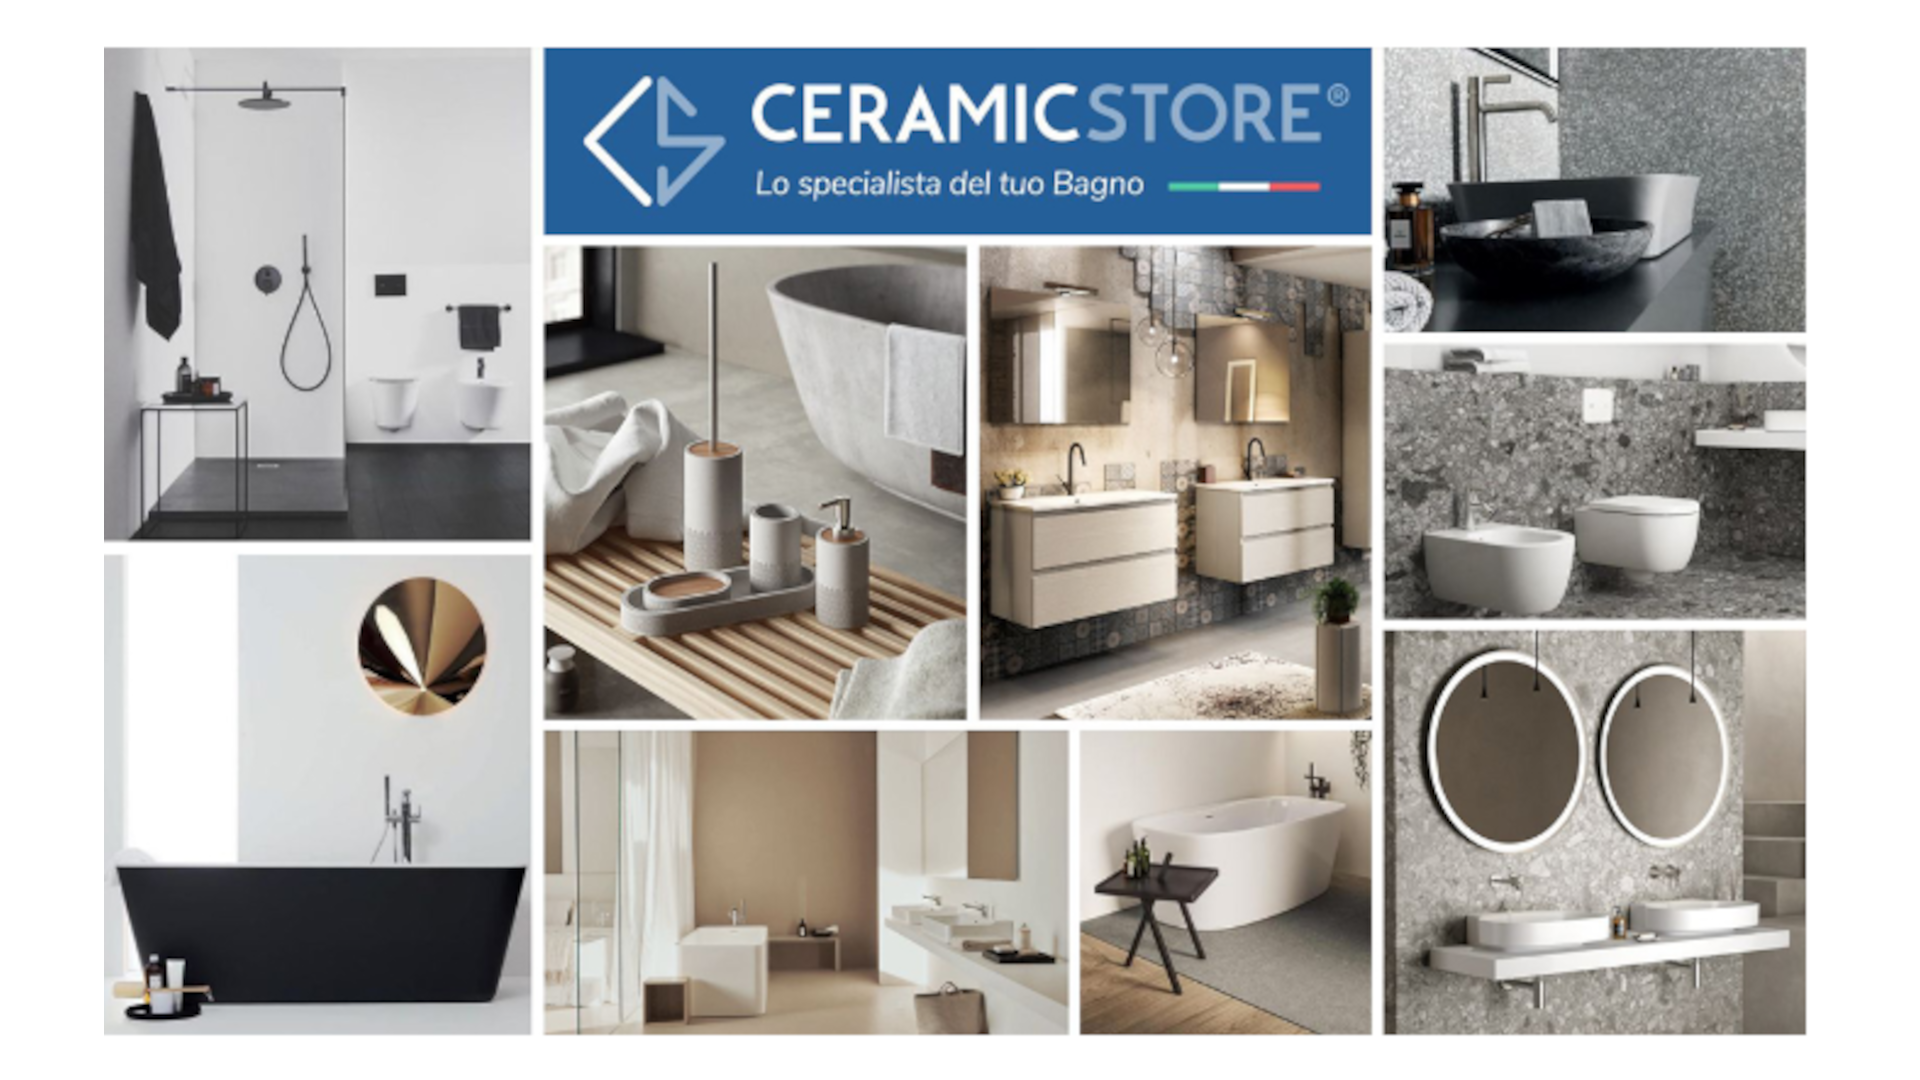 Made in Italy excellence: CeramicStore and Italian quality in bathroom furniture